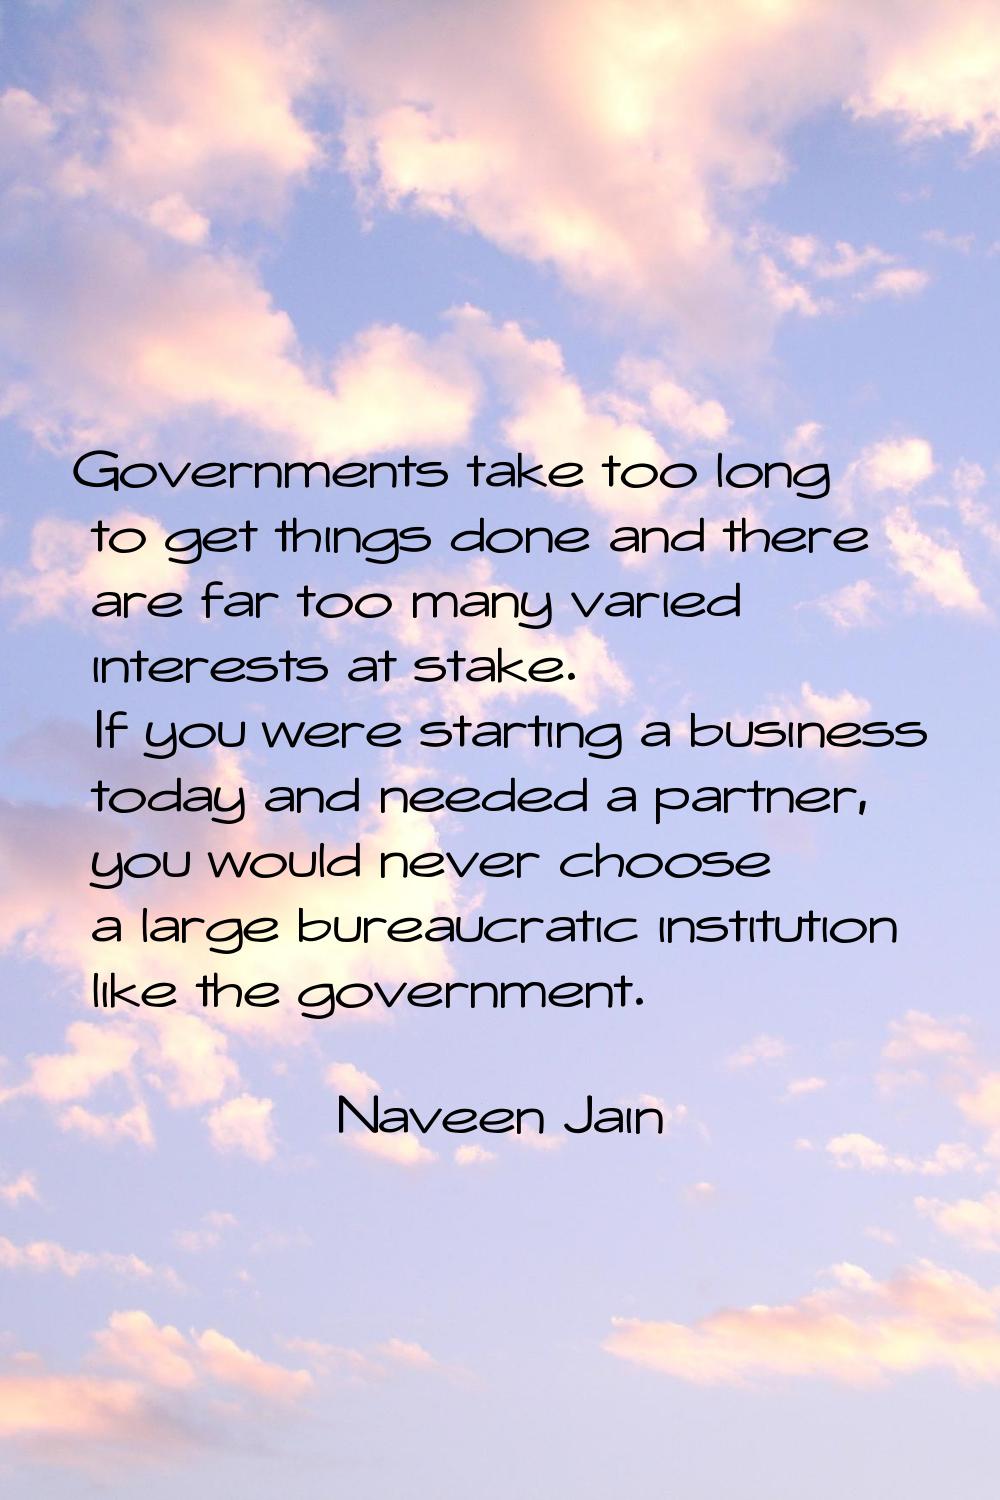 Governments take too long to get things done and there are far too many varied interests at stake. 